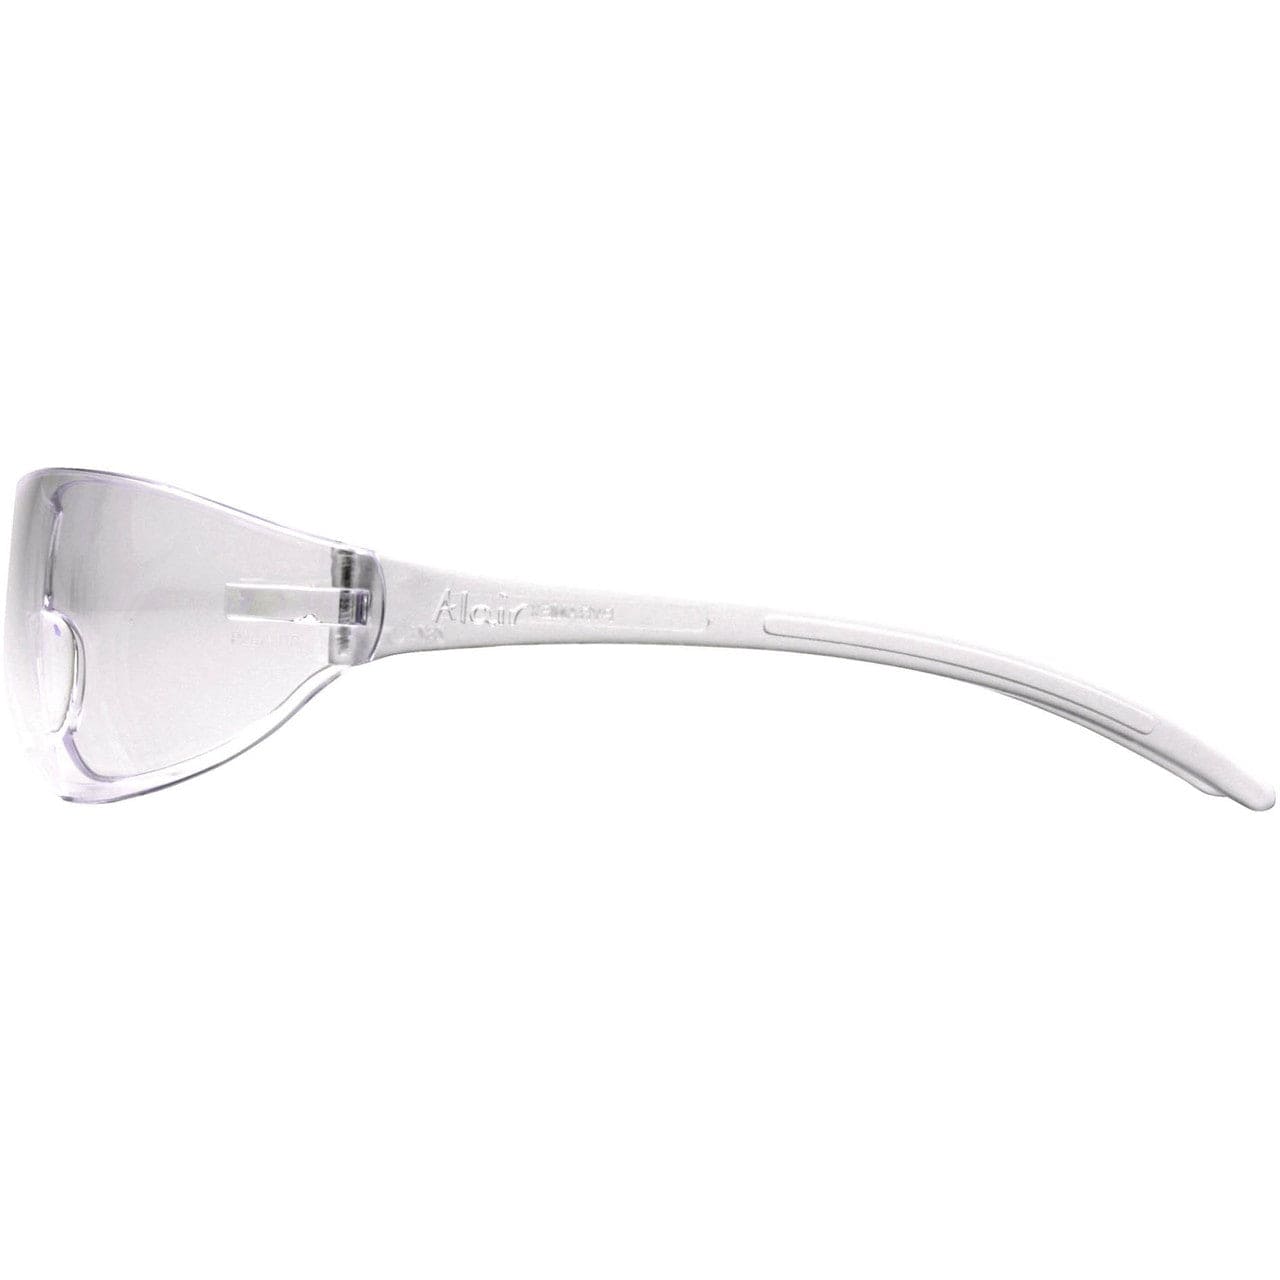 Pyramex Alair Safety Glasses with Clear Anti-Fog Lens S3210ST Side View